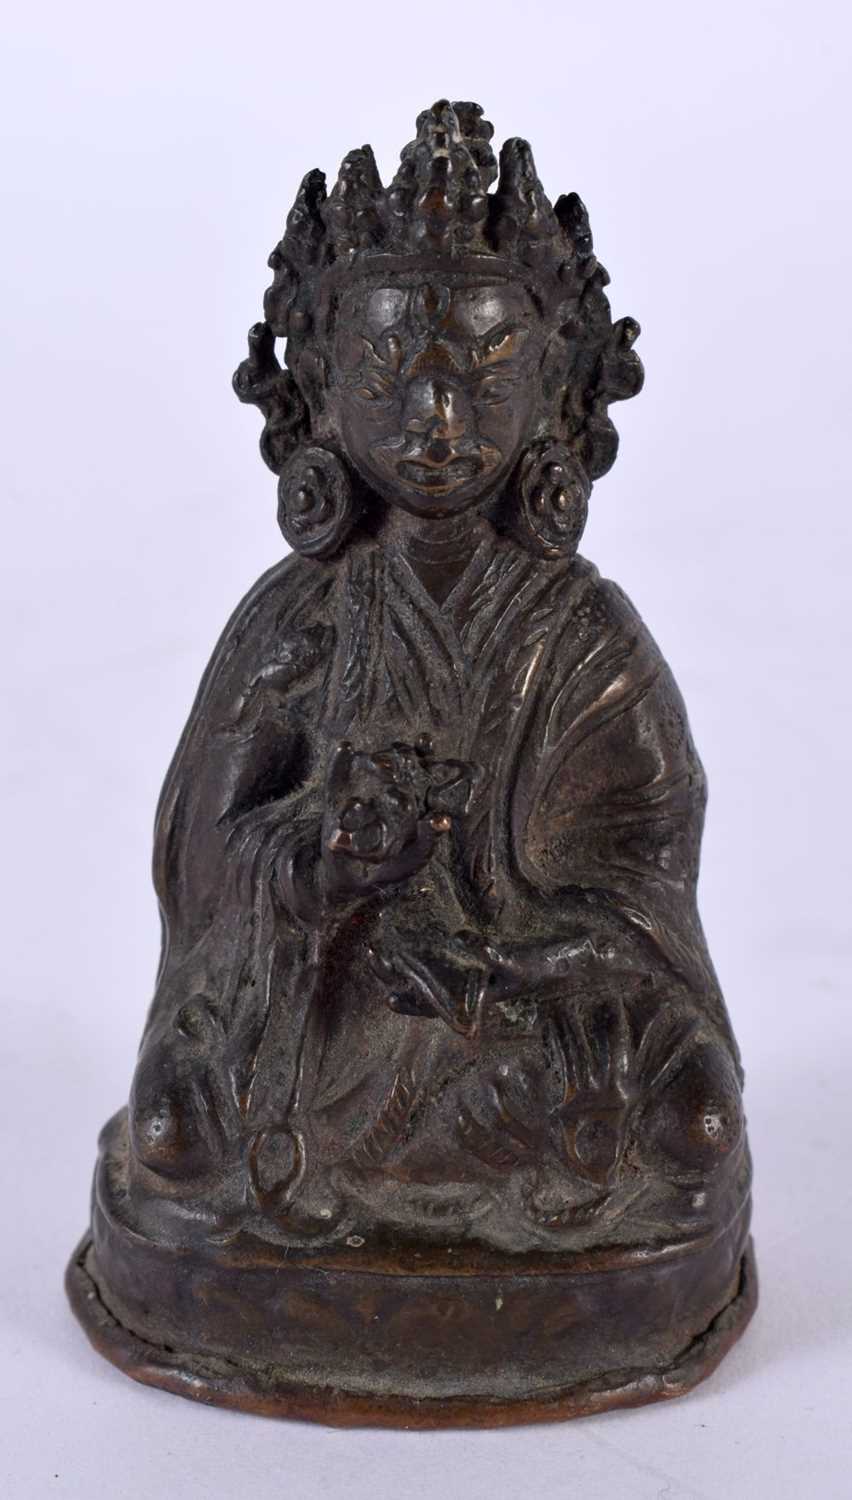 AN 18TH/19TH CENTURY NEPALESE TIBETAN BRONZE FIGURE OF A BUDDHA modelled scowling in robes holding a